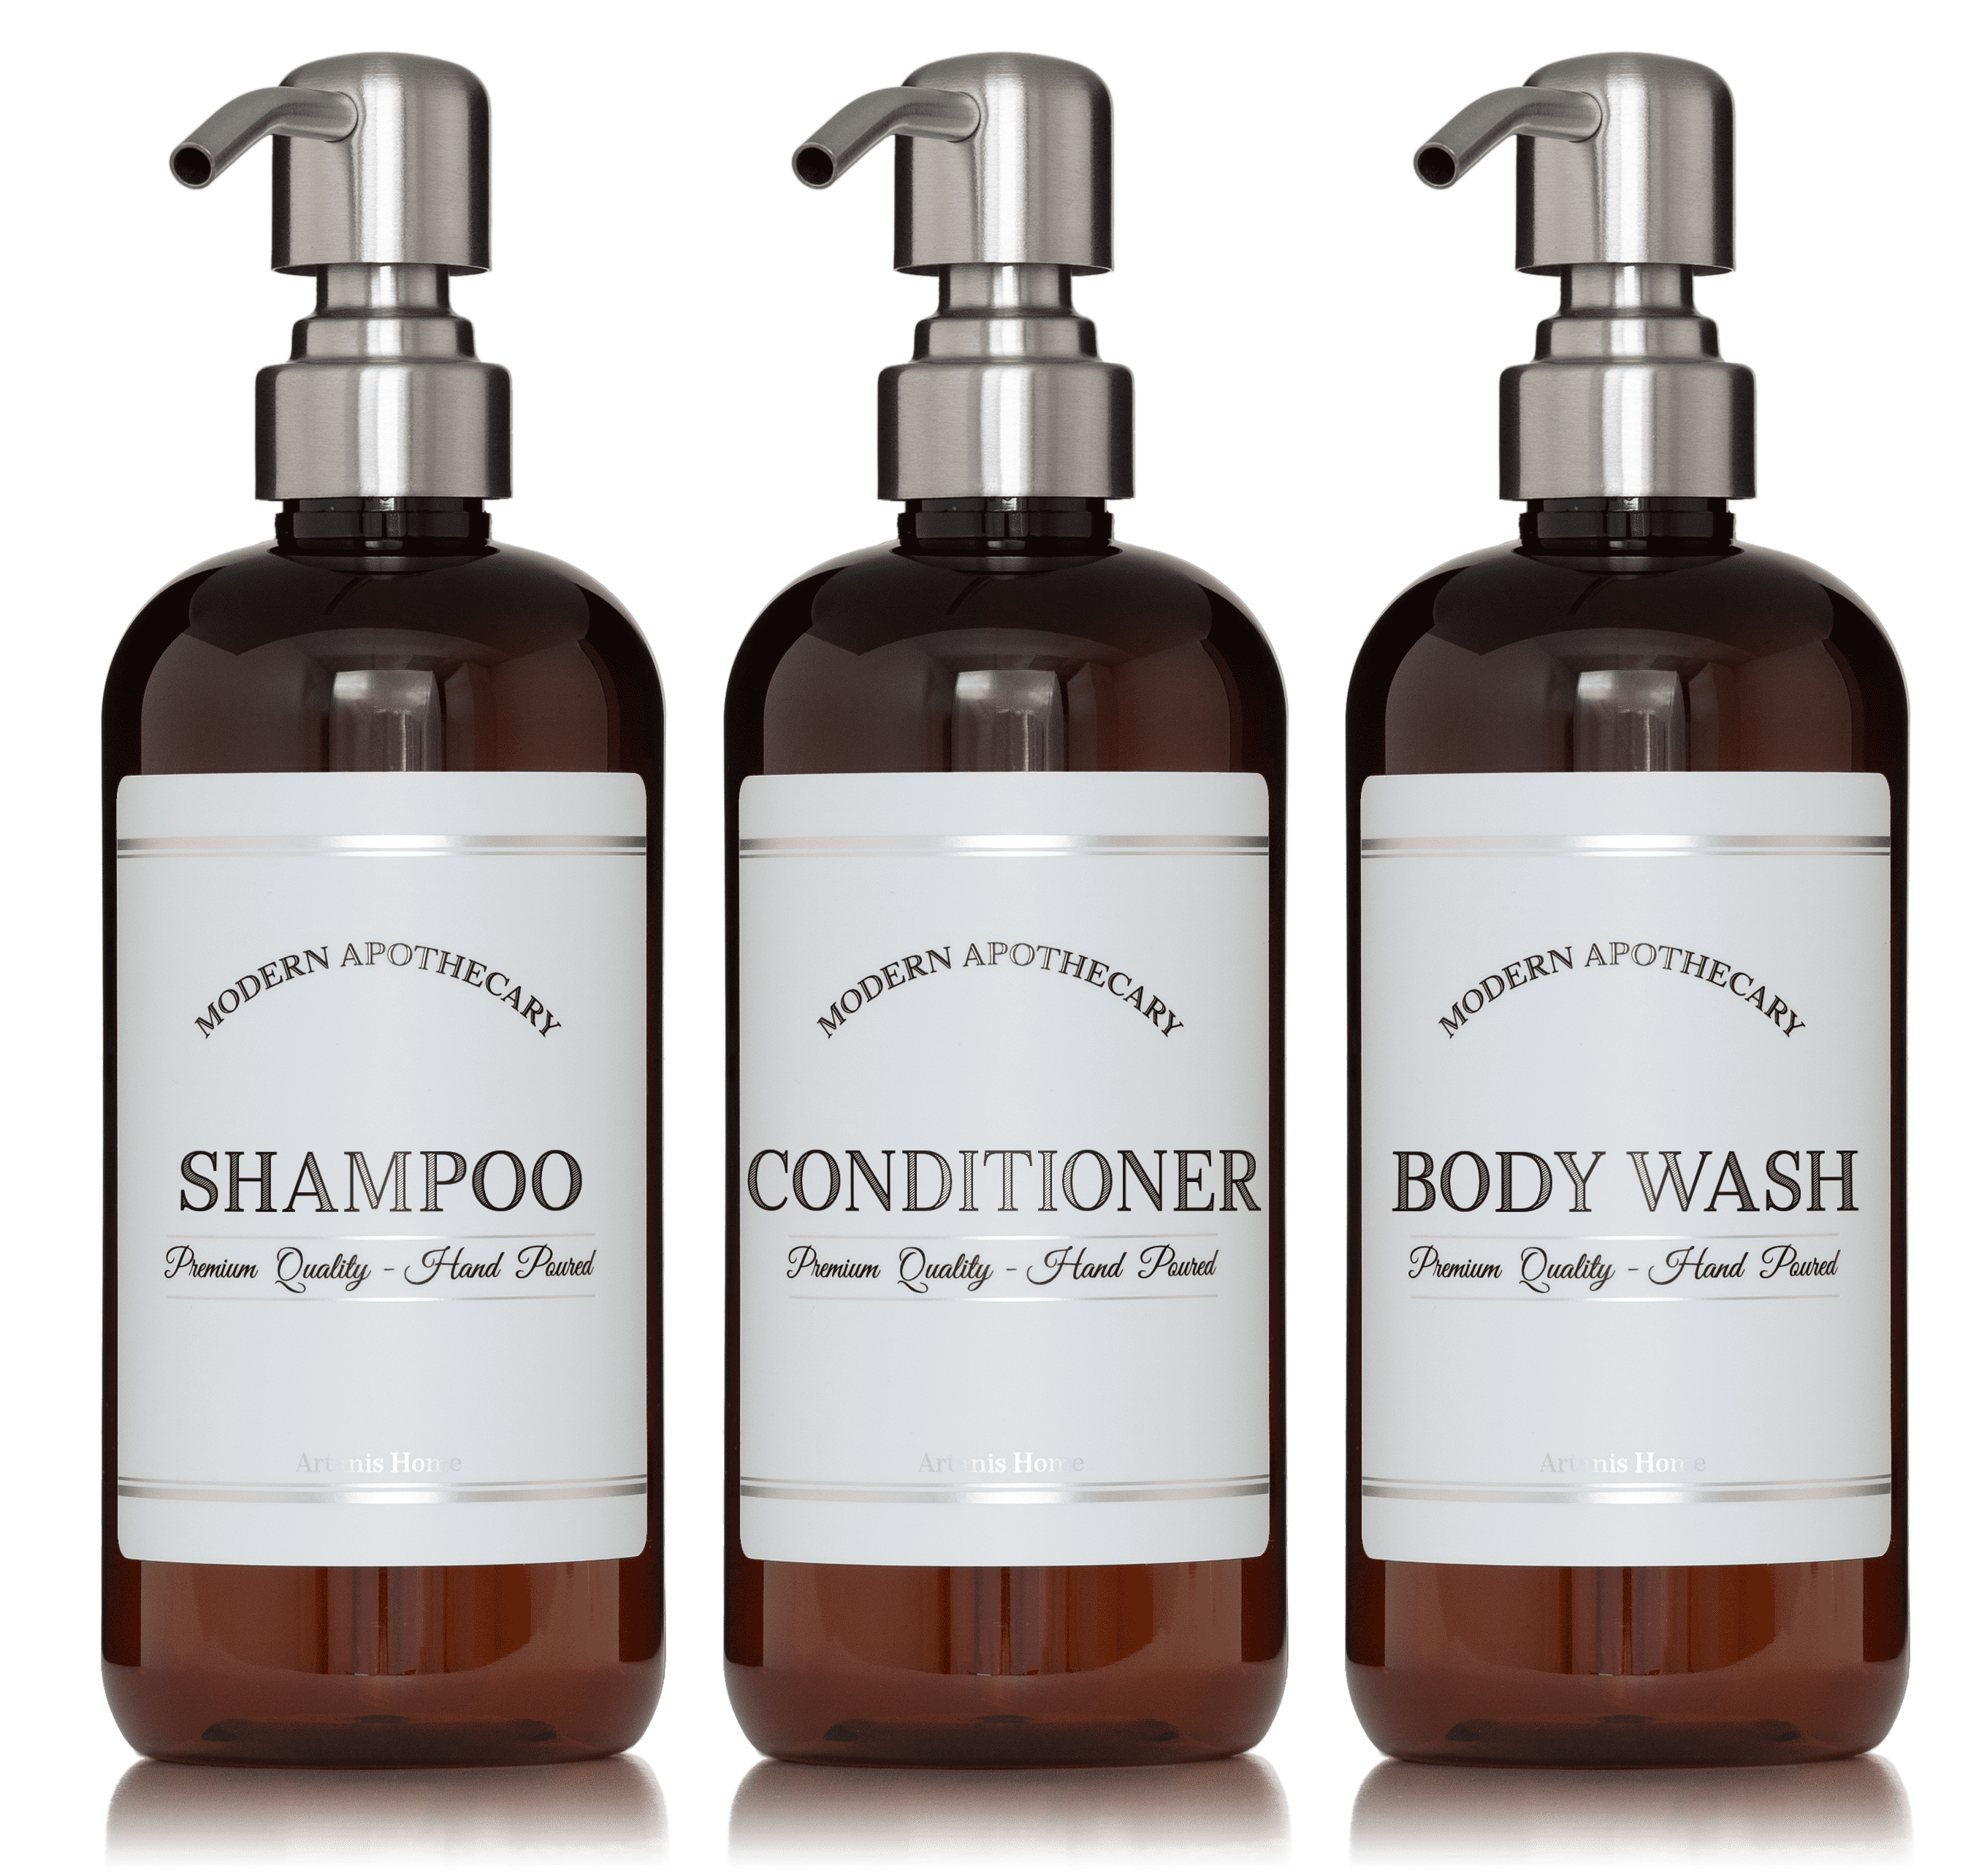 Cosmic gået vanvittigt Parasit Artanis Home Amber Refillable Body Wash, Shampoo and Conditioner Bottles -  PET Plastic Shampoo Bottles with White Plastic Pumps and "Modern  Apothecary" Labels- 16 oz, 3 Pack - Walmart.com